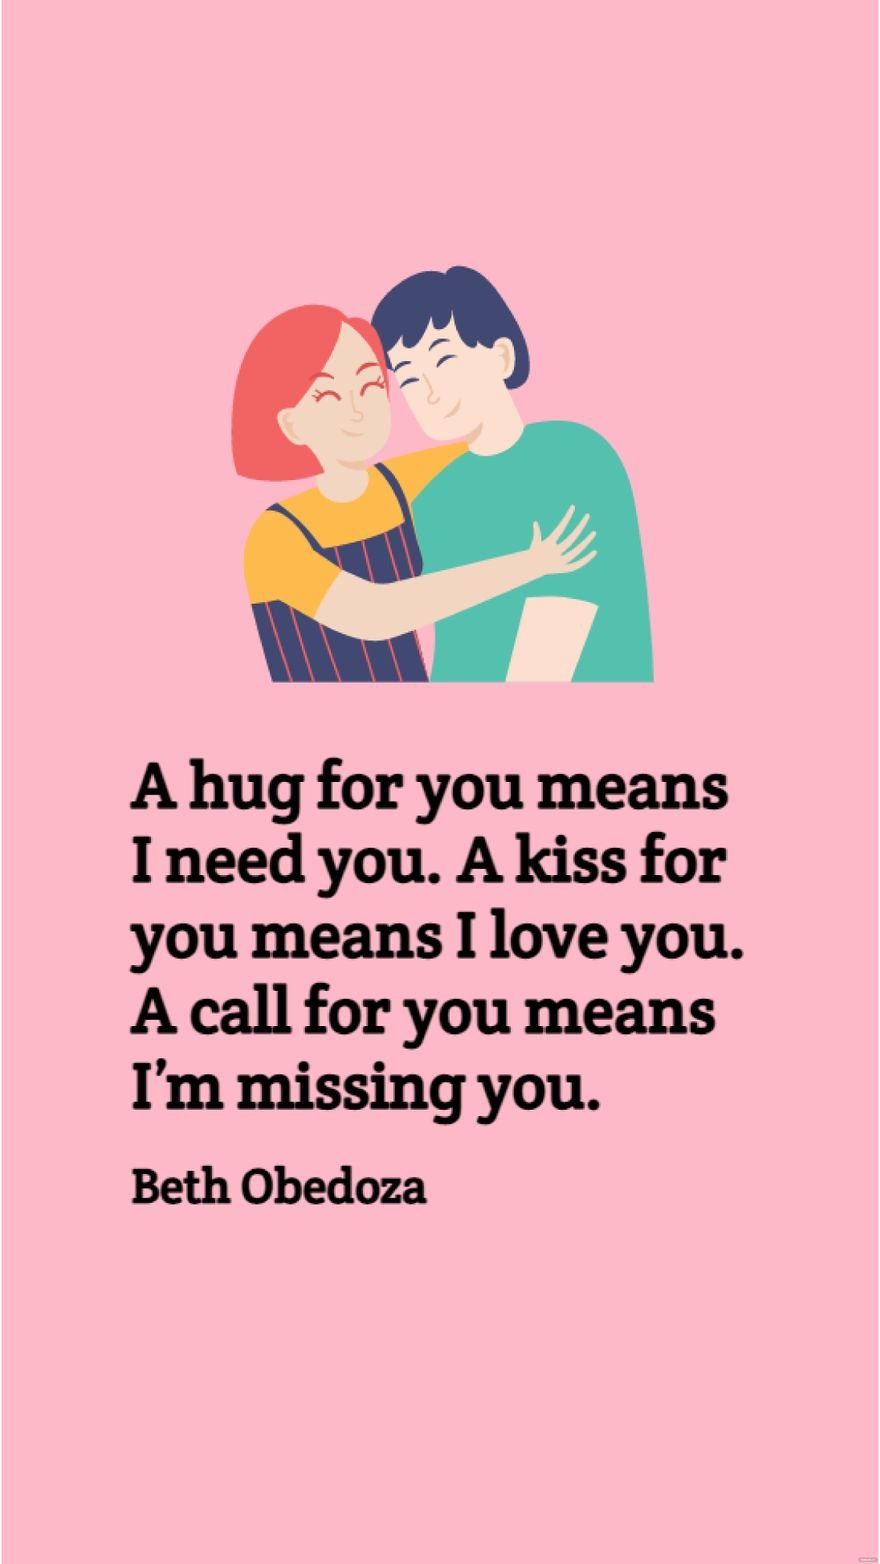 Beth Obedoza - A hug for you means I need you. A kiss for you means I love you. A call for you means I’m missing you.